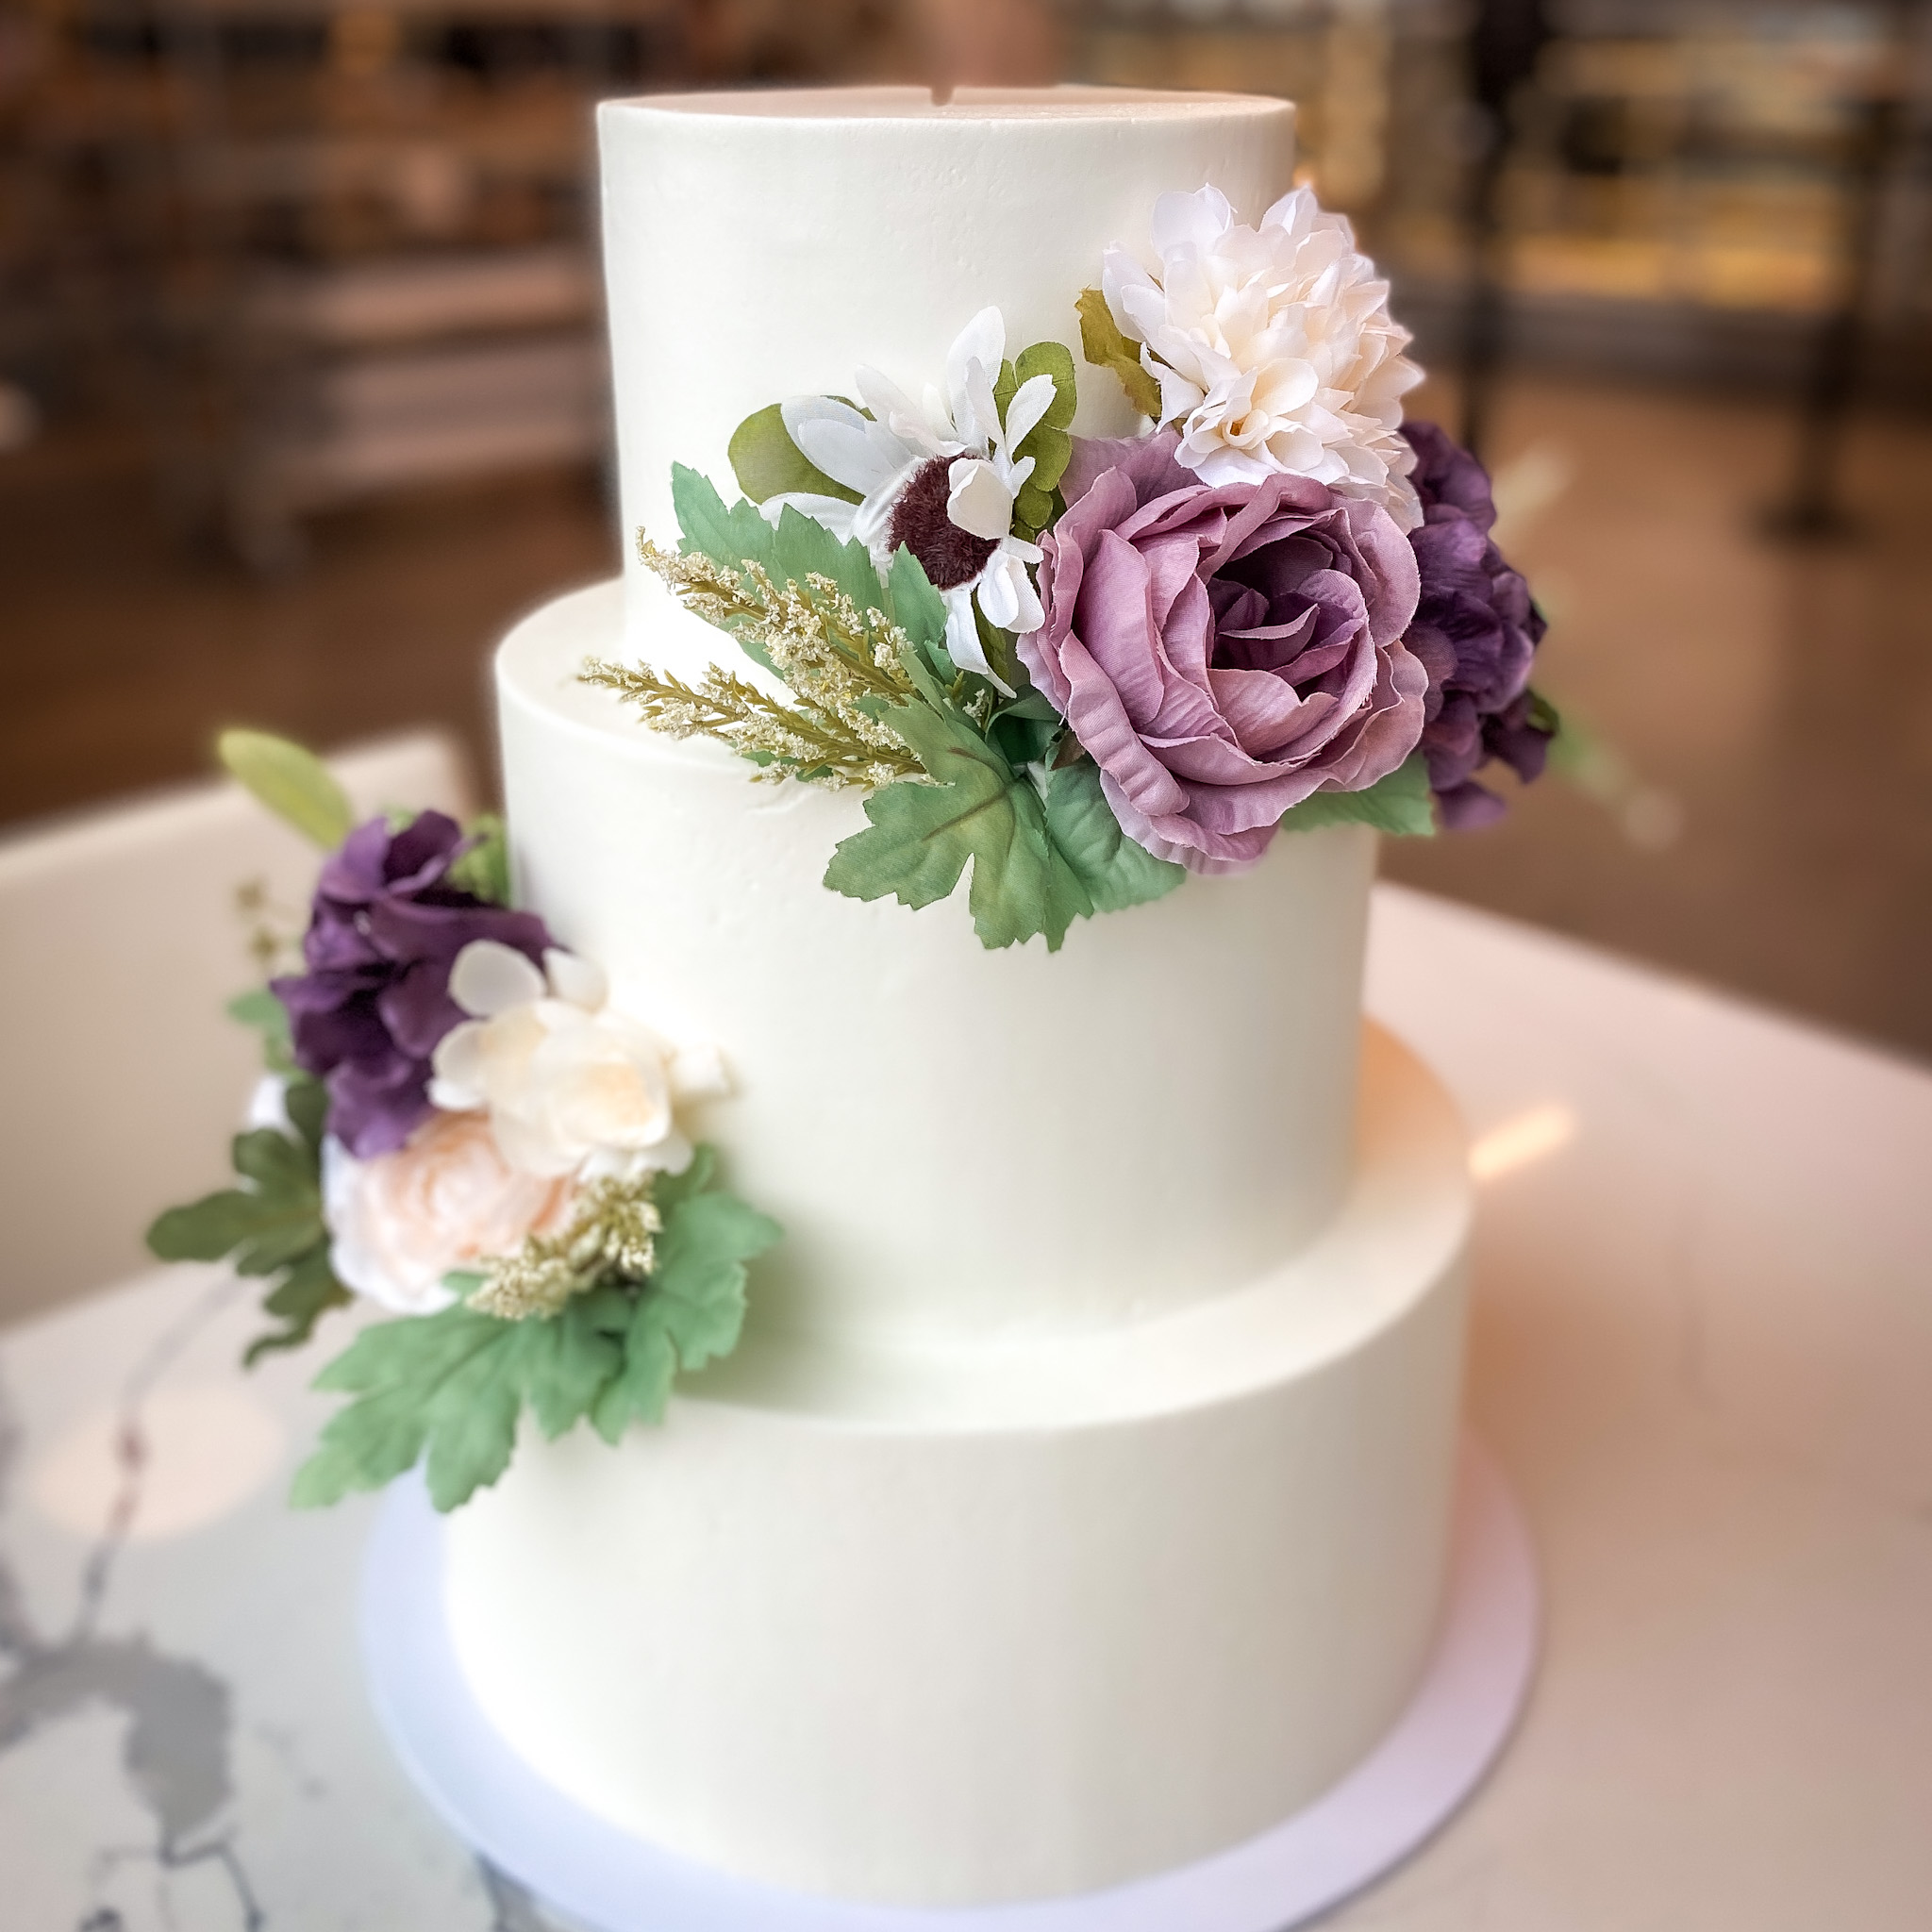 https://oakmontbakery.com/wp-content/uploads/2020/06/Smooth-Iced-with-Silk-Flowers.jpg